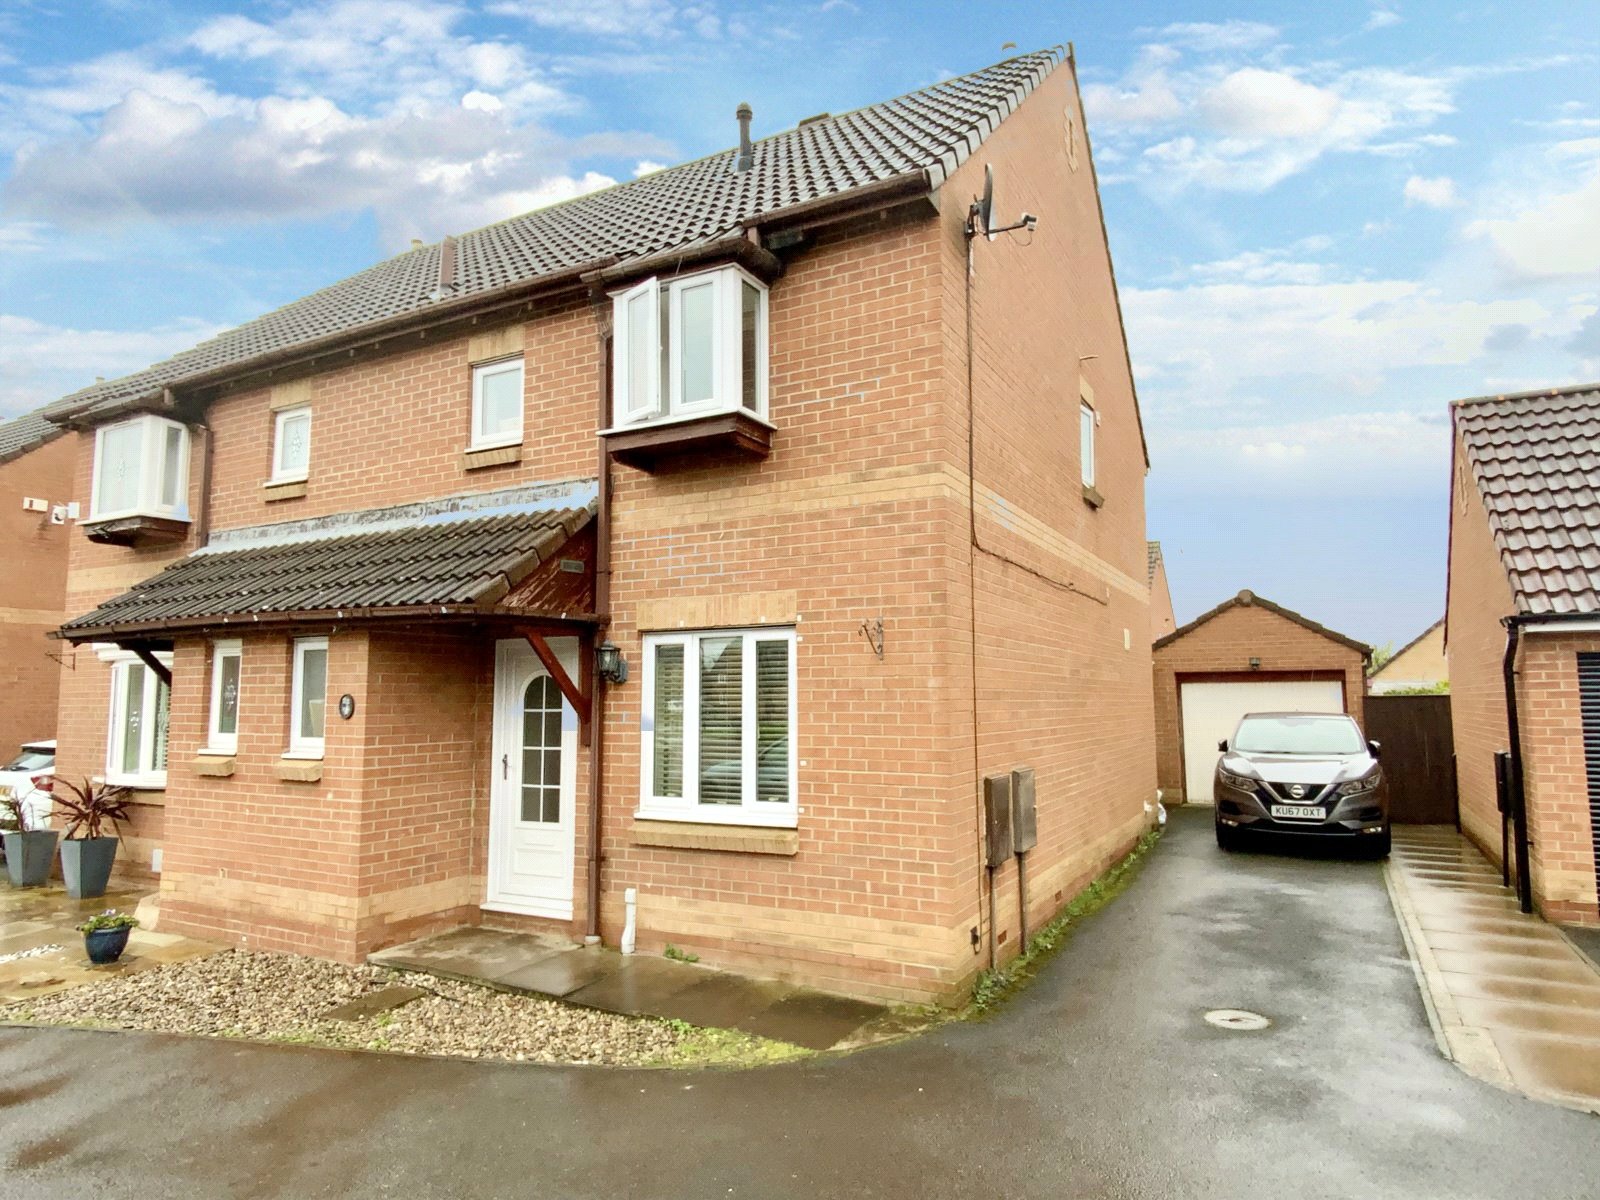 3 bed house for sale in Holystone Drive, Ingleby Barwick - Property Image 1